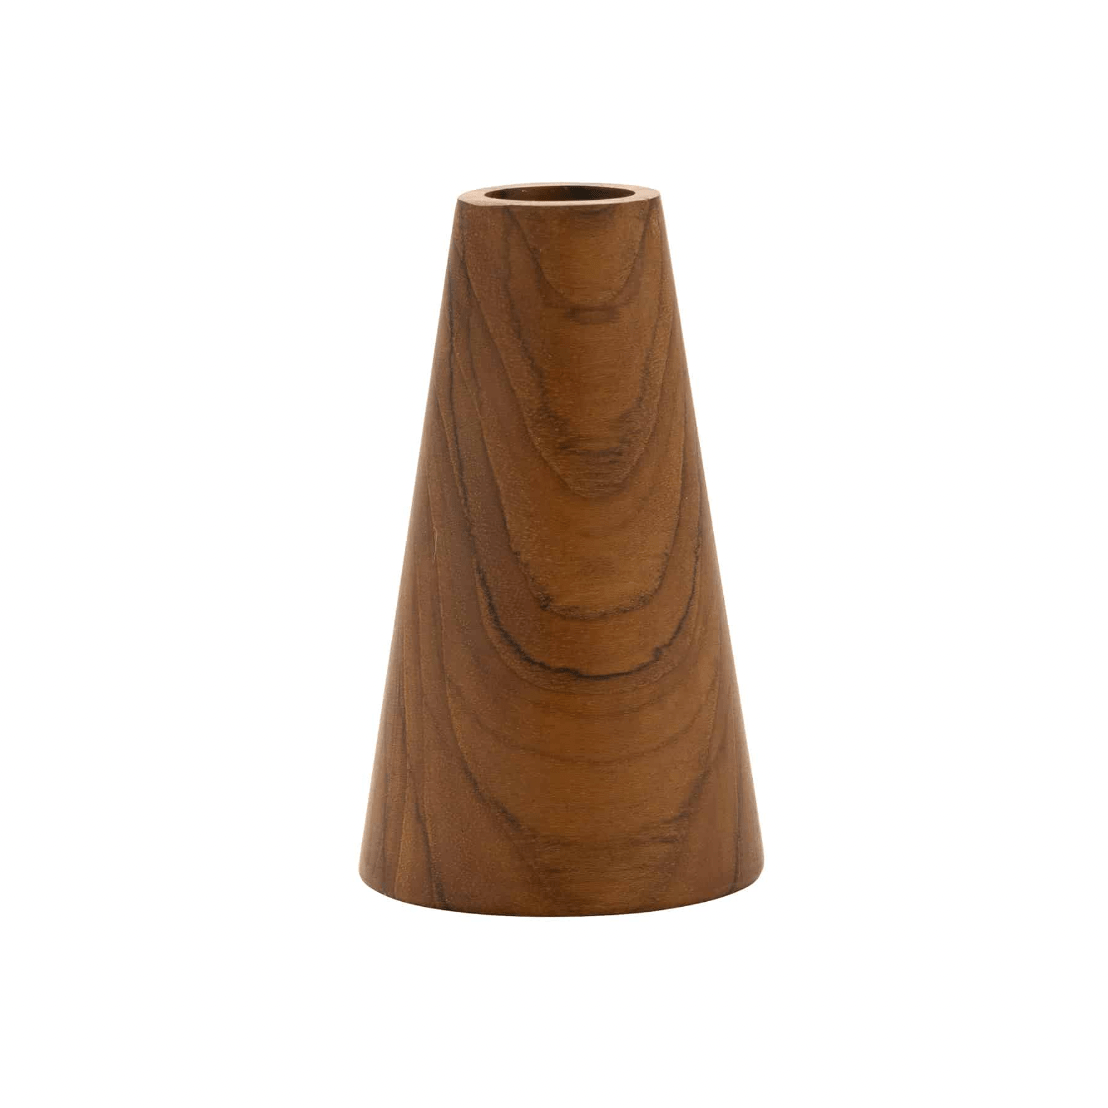 Triangle Recycled Teak Candlestick, Large - By Native